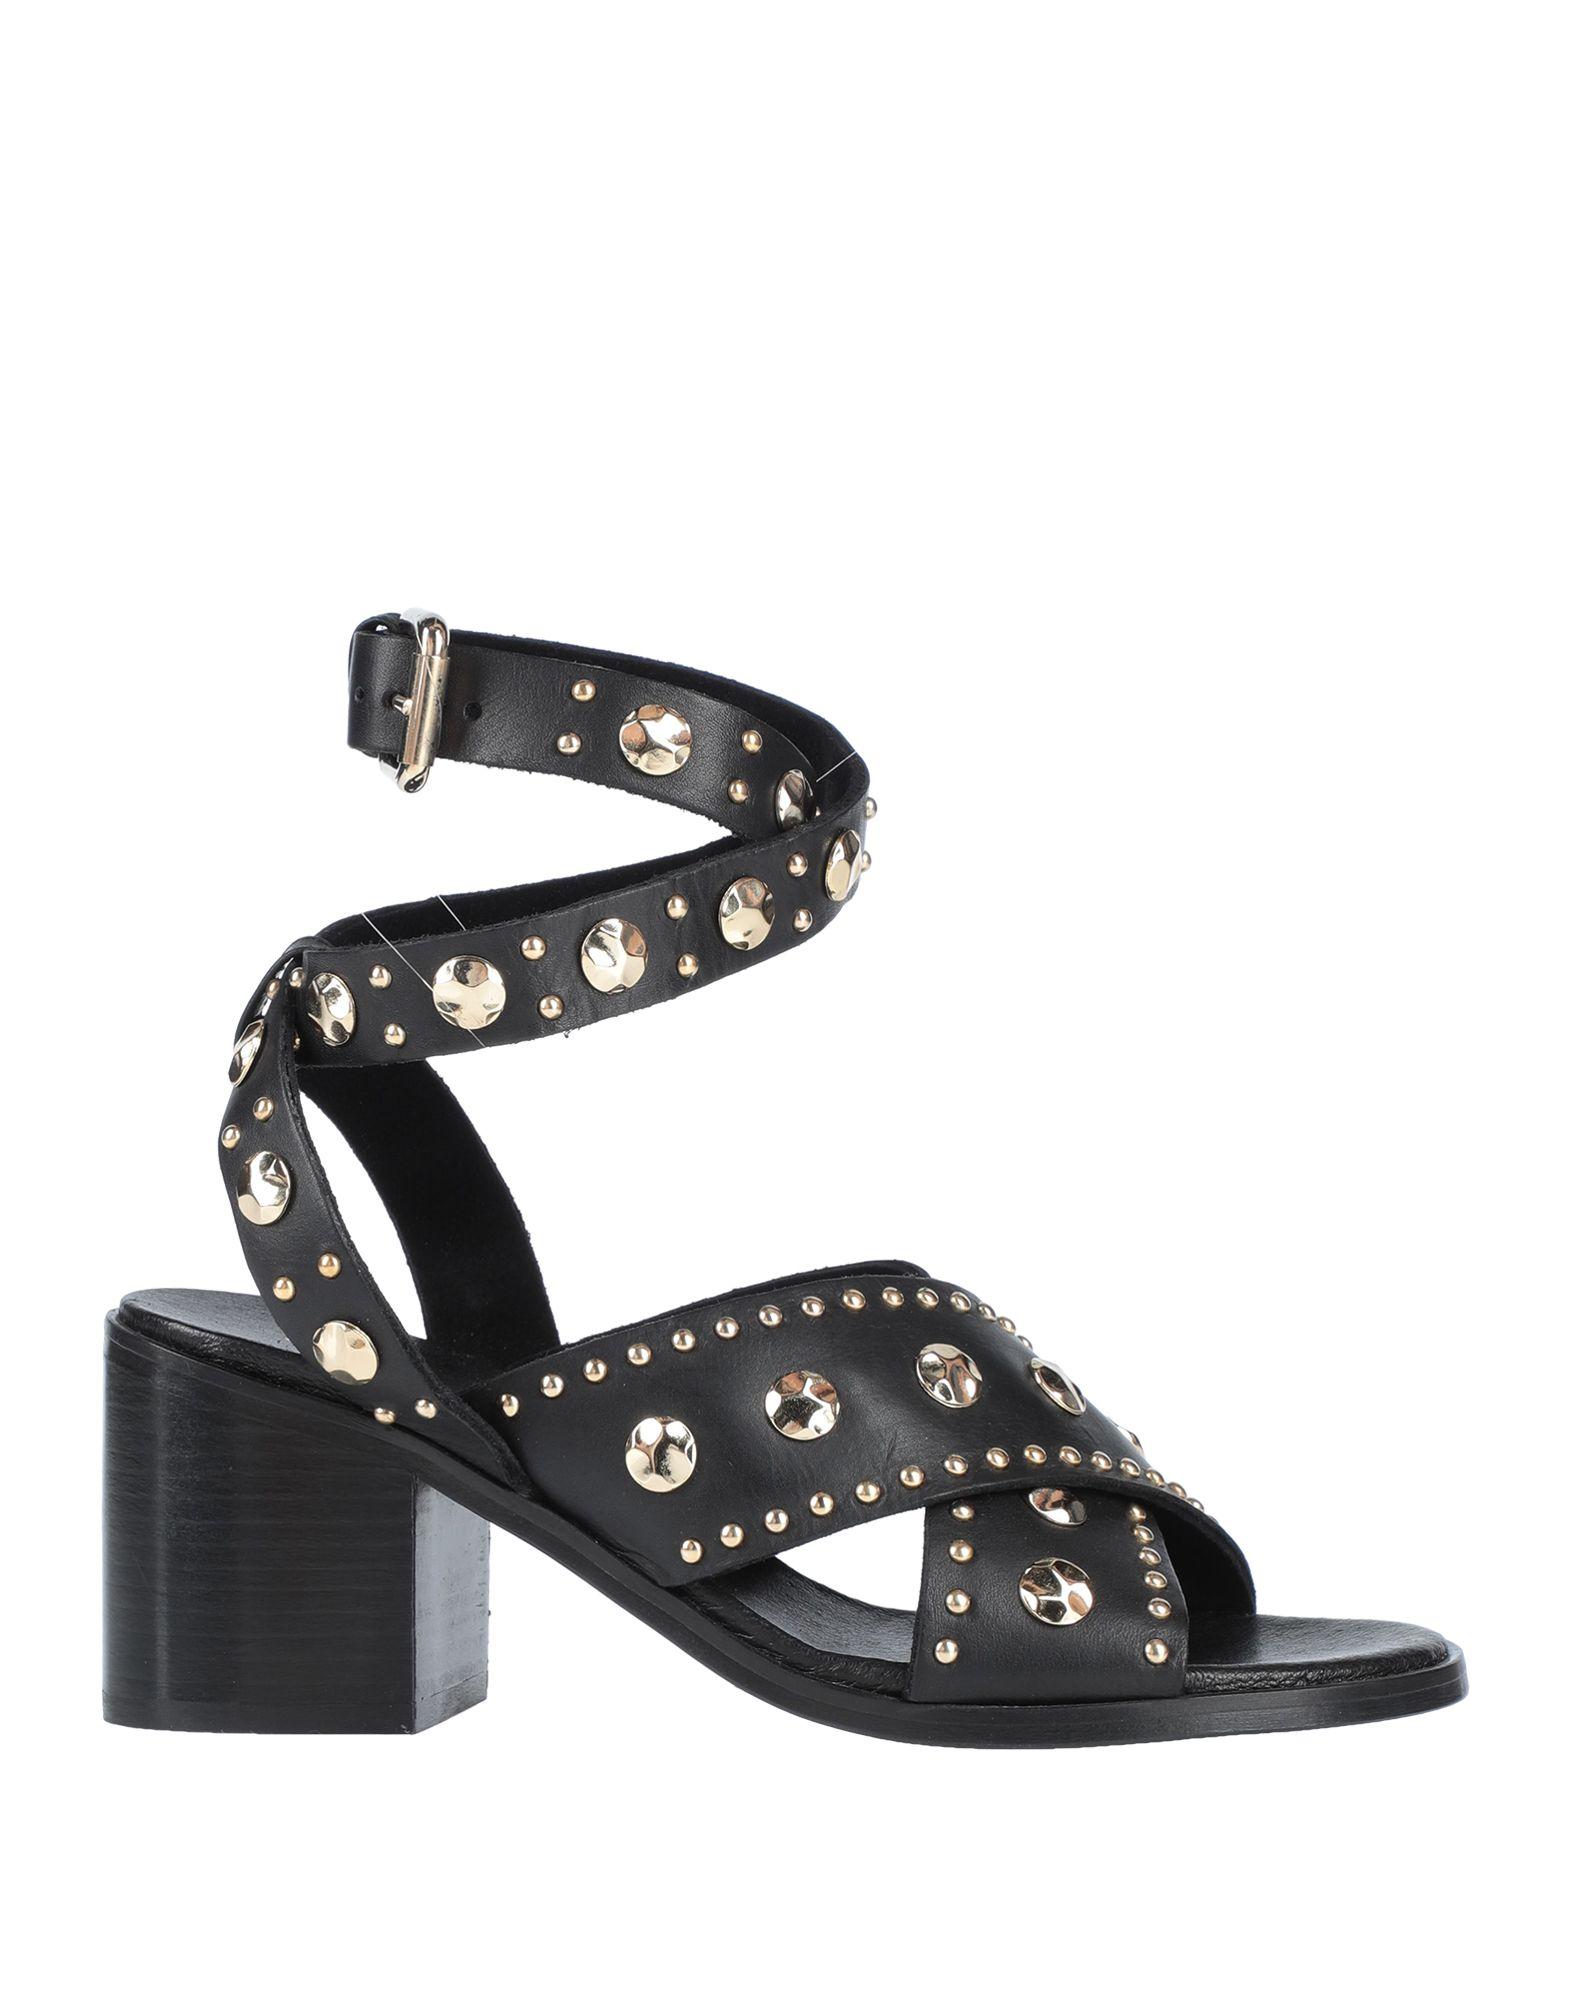 Maje Leather Sandals in Black - Lyst